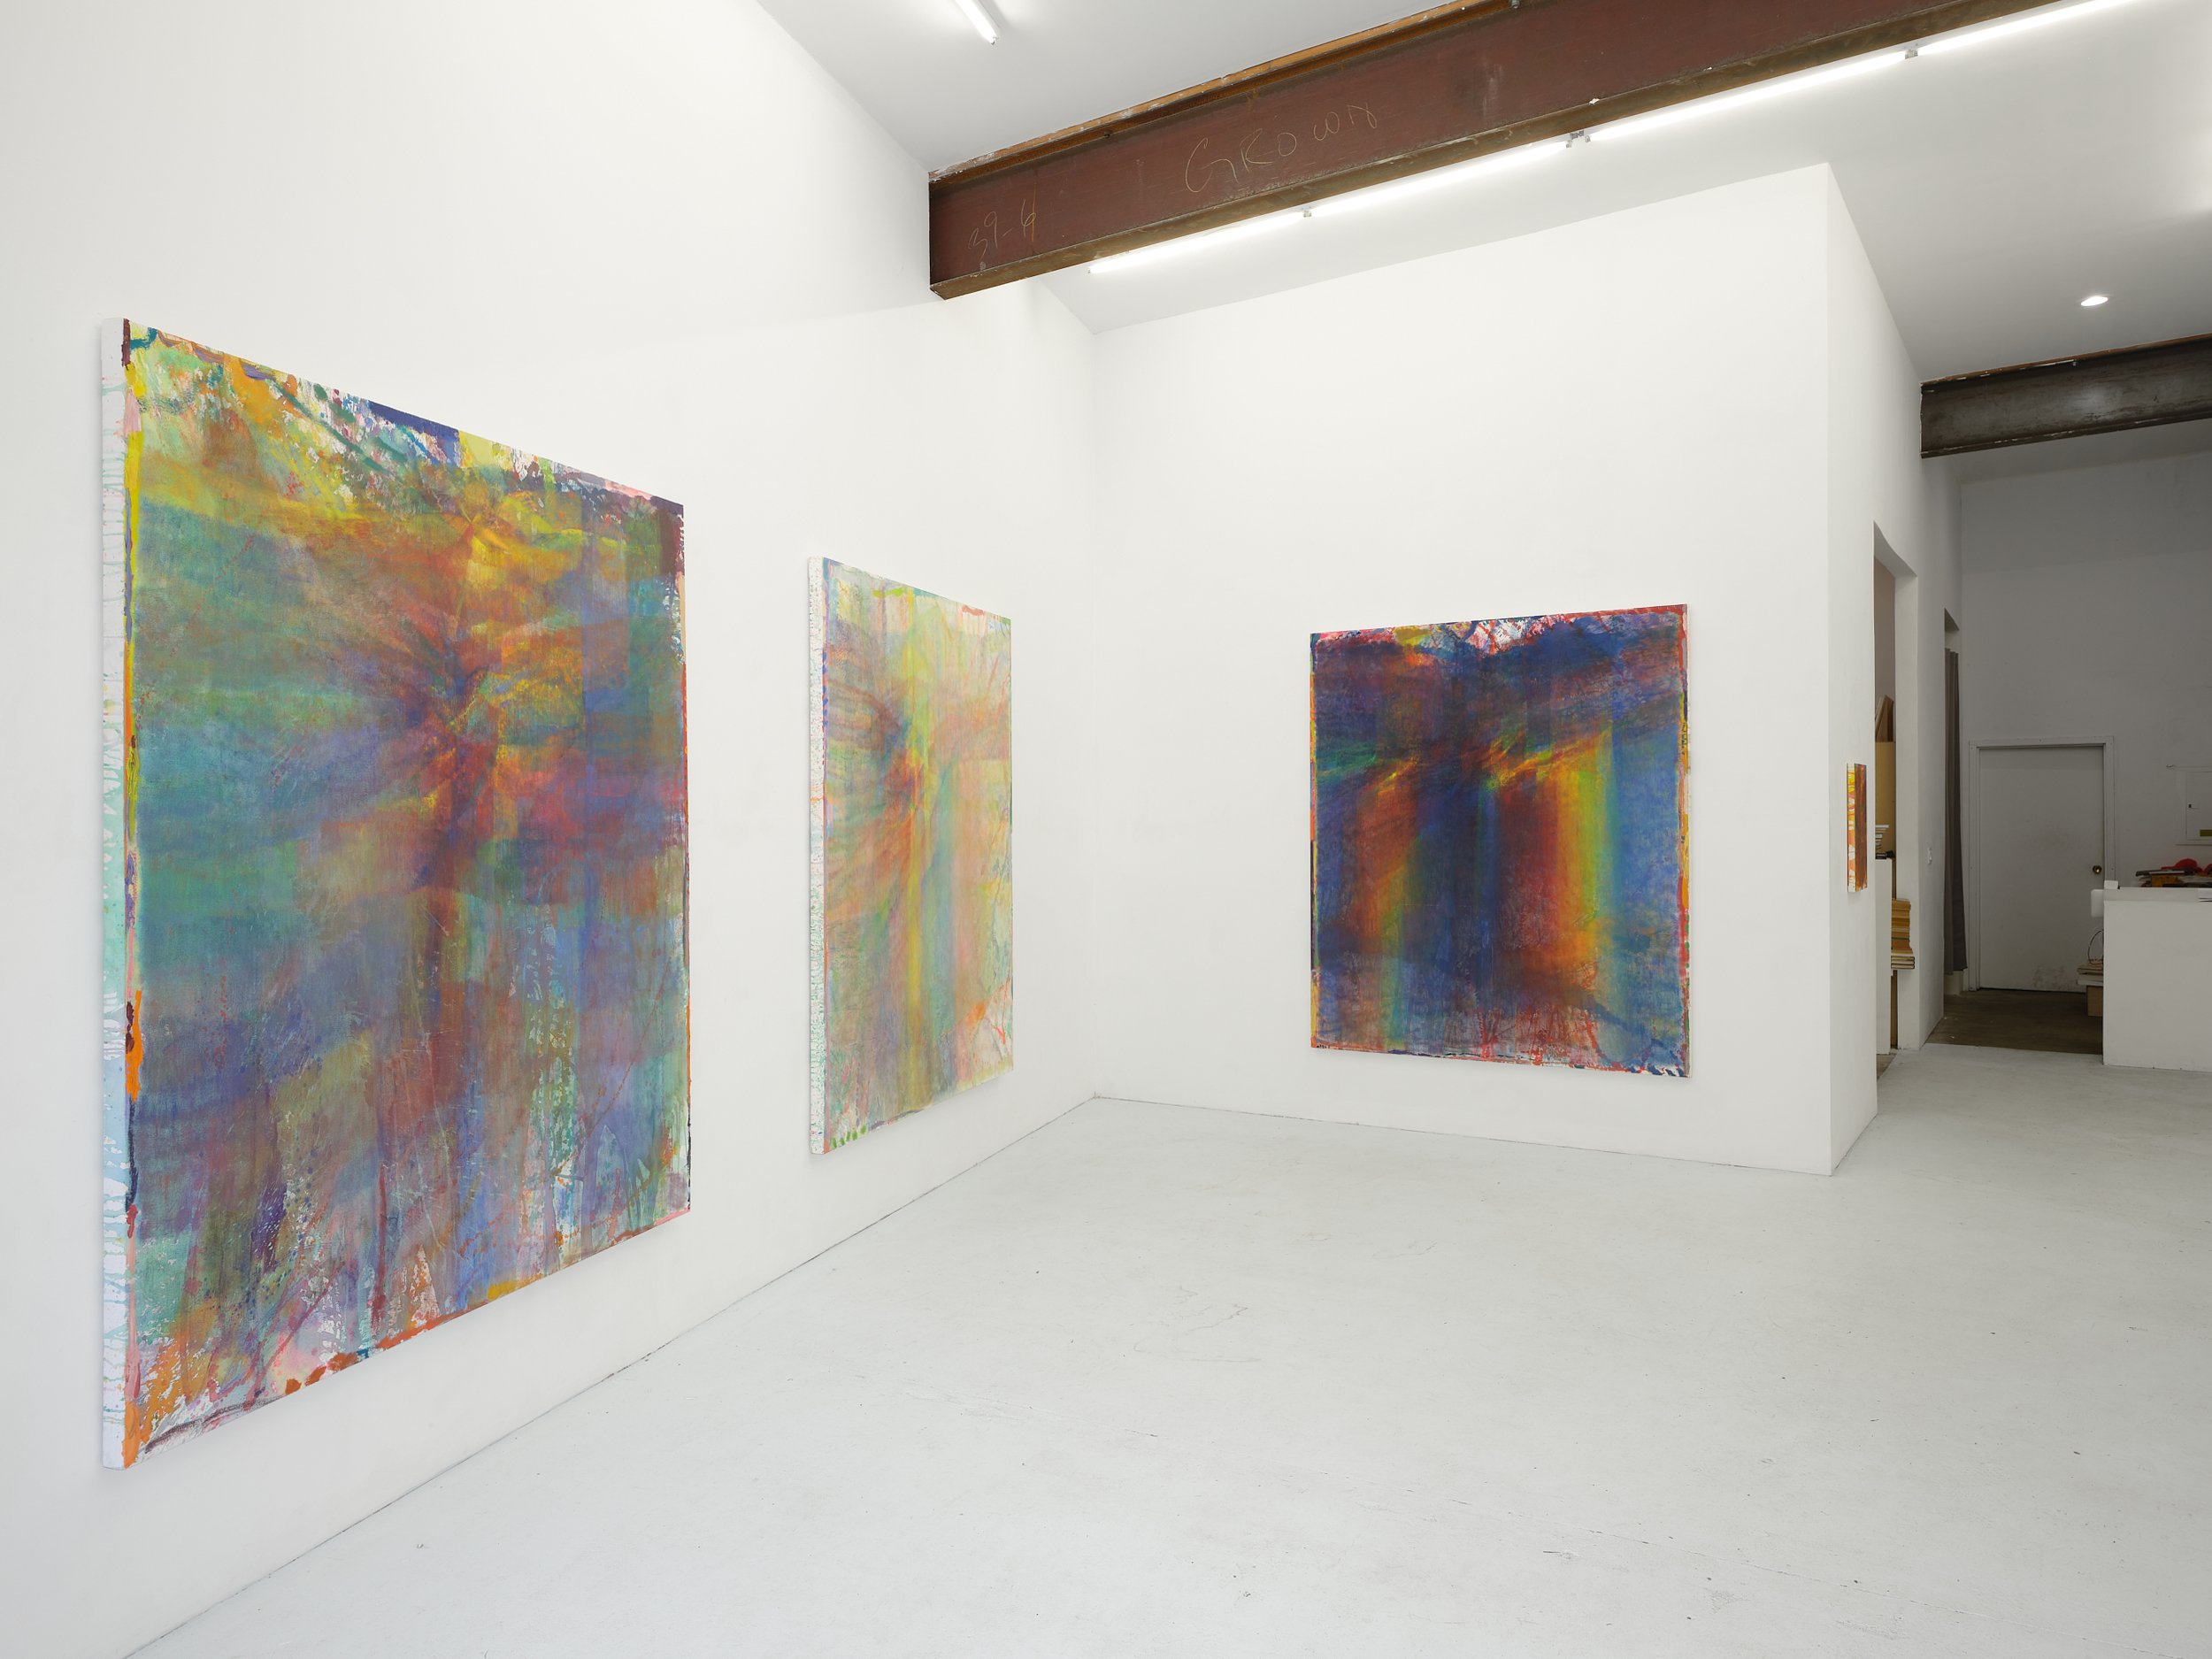 Three large rainbow-hued abstract paintings in white-walled gallery space